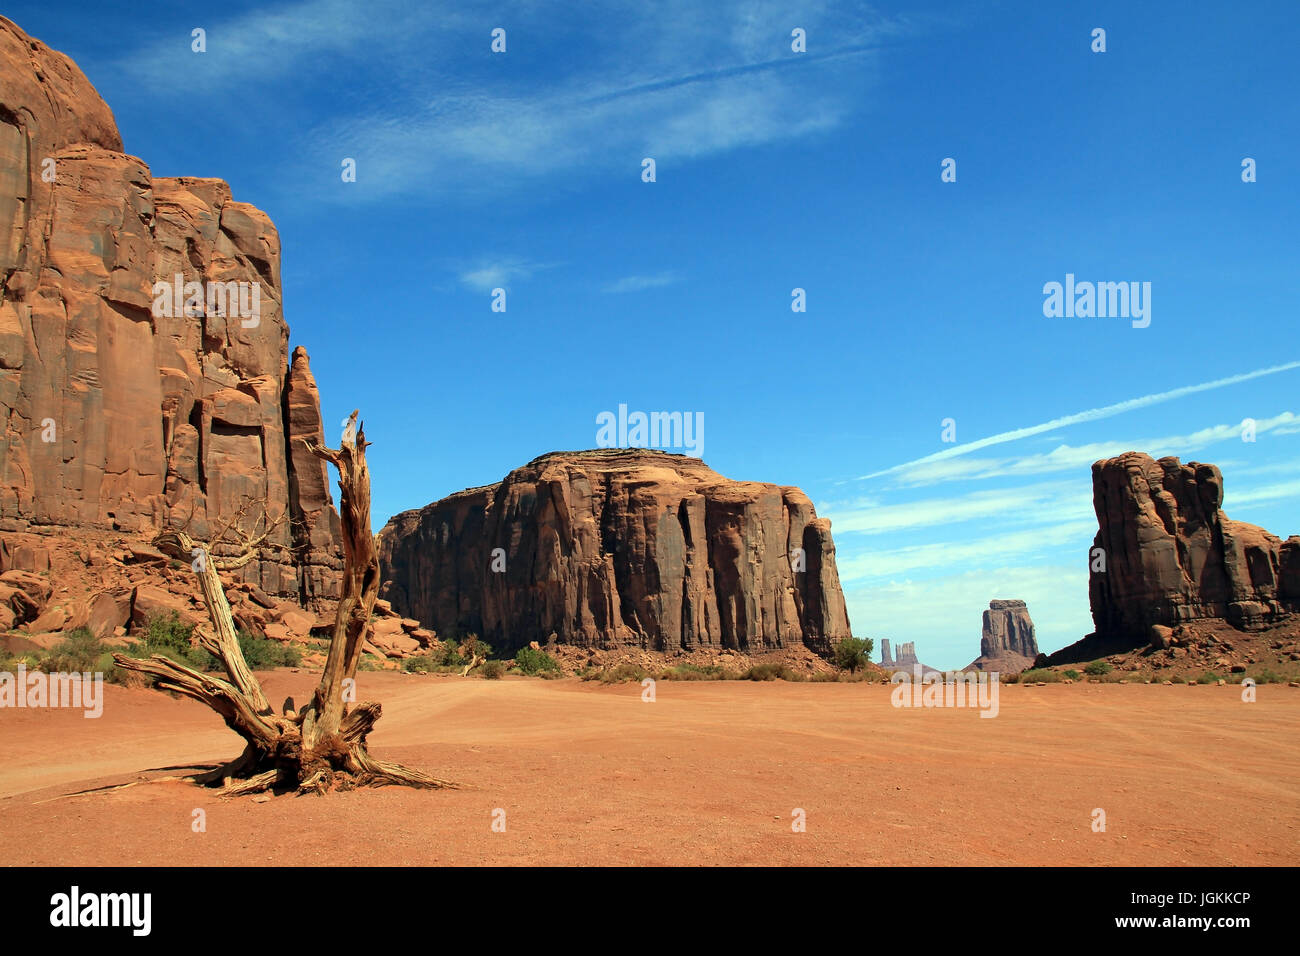 View of Monument Valley Navajo Tribal Park. Utah, United States Stock Photo